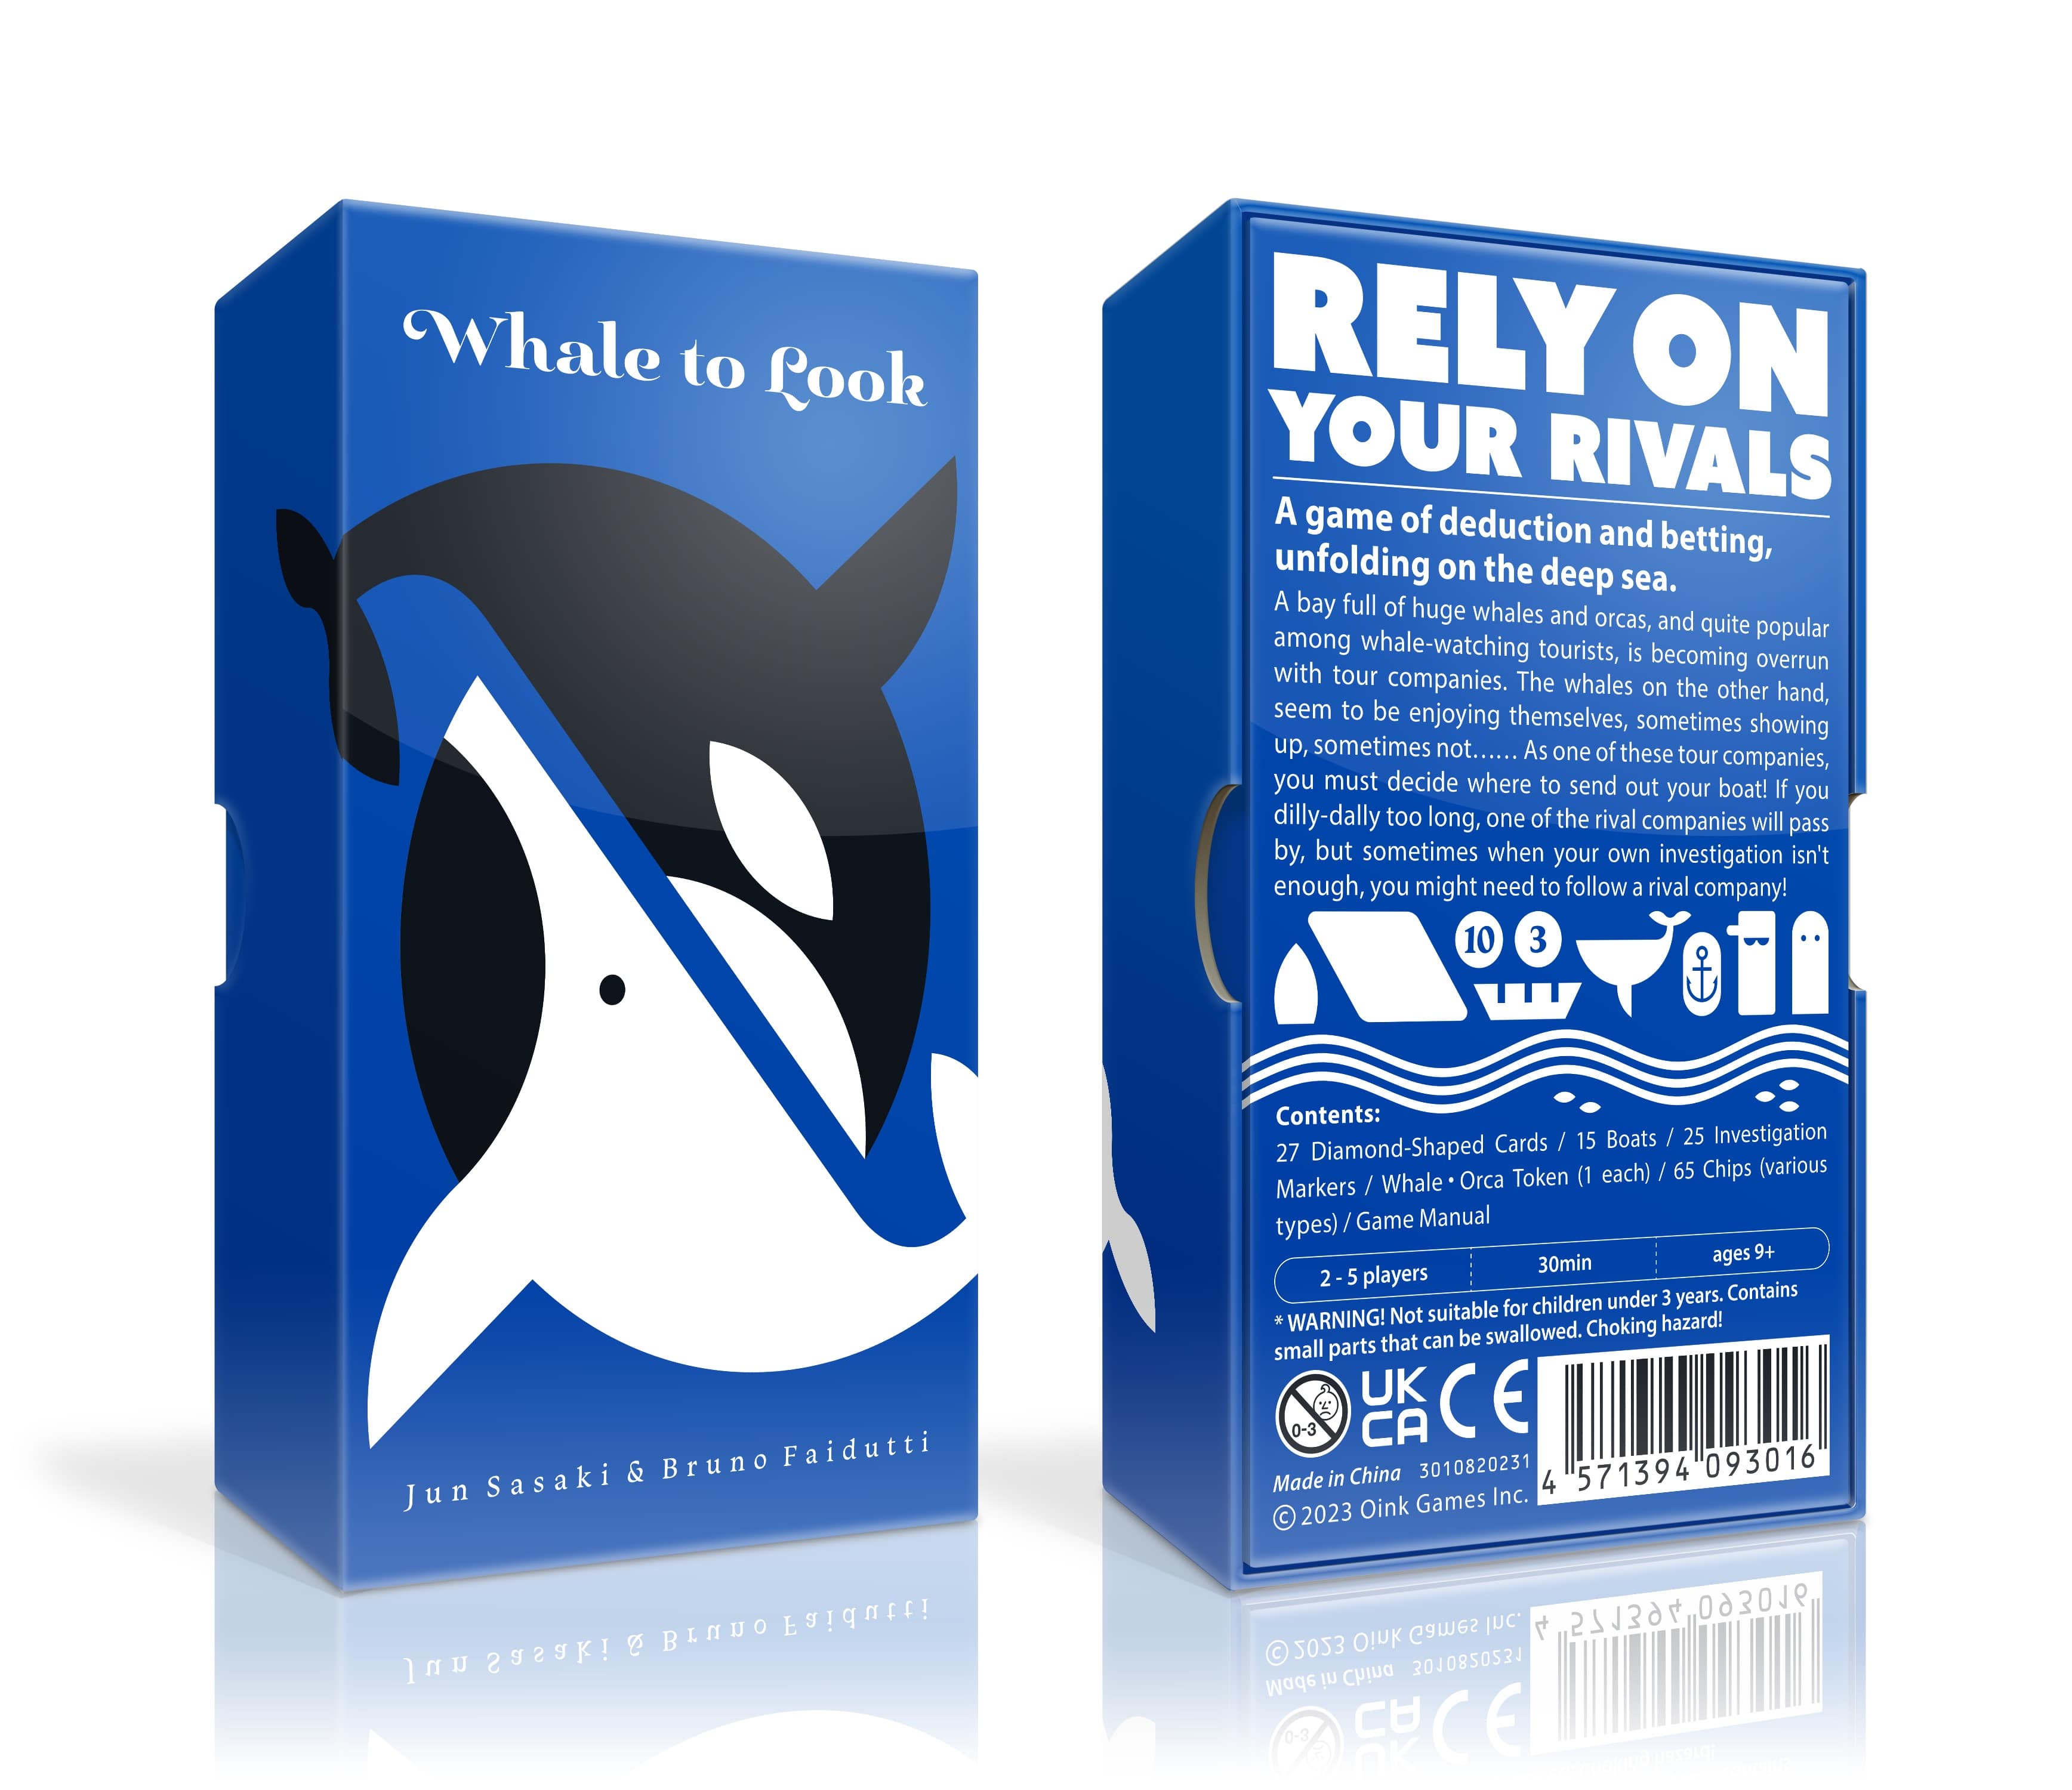 Oink Games Inc Whale to Look